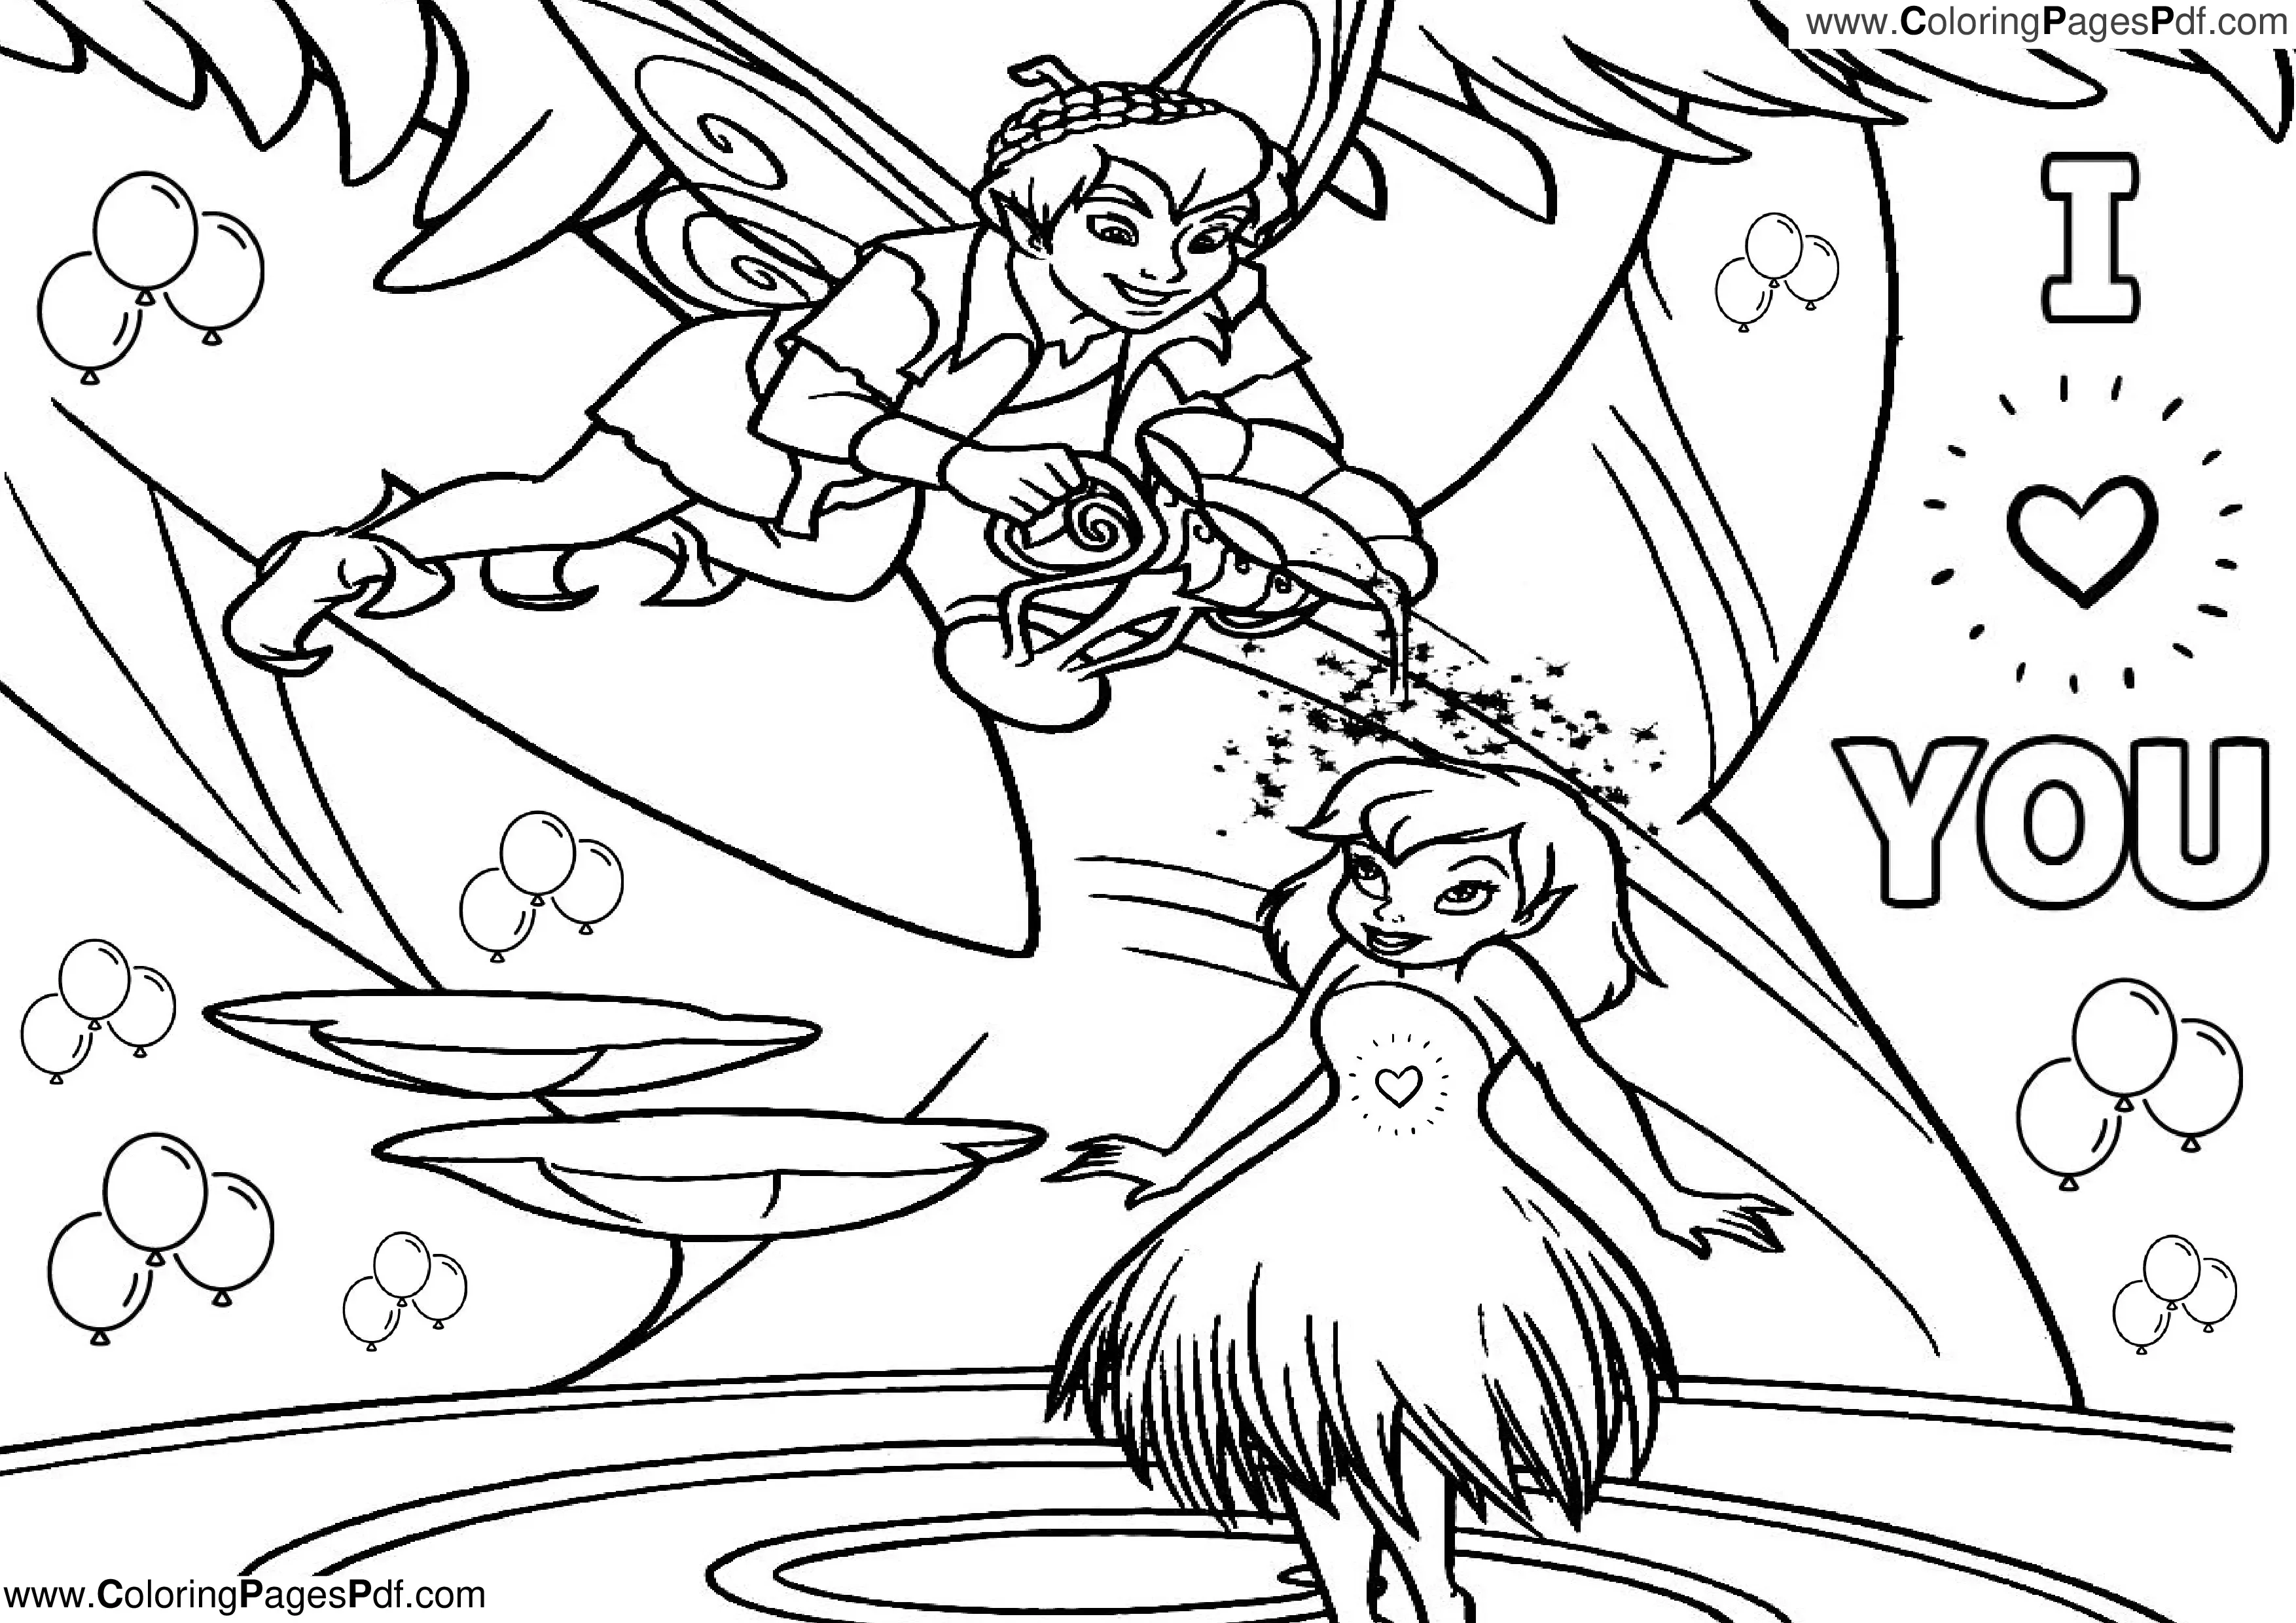 Tinkerbell coloring pages for adults